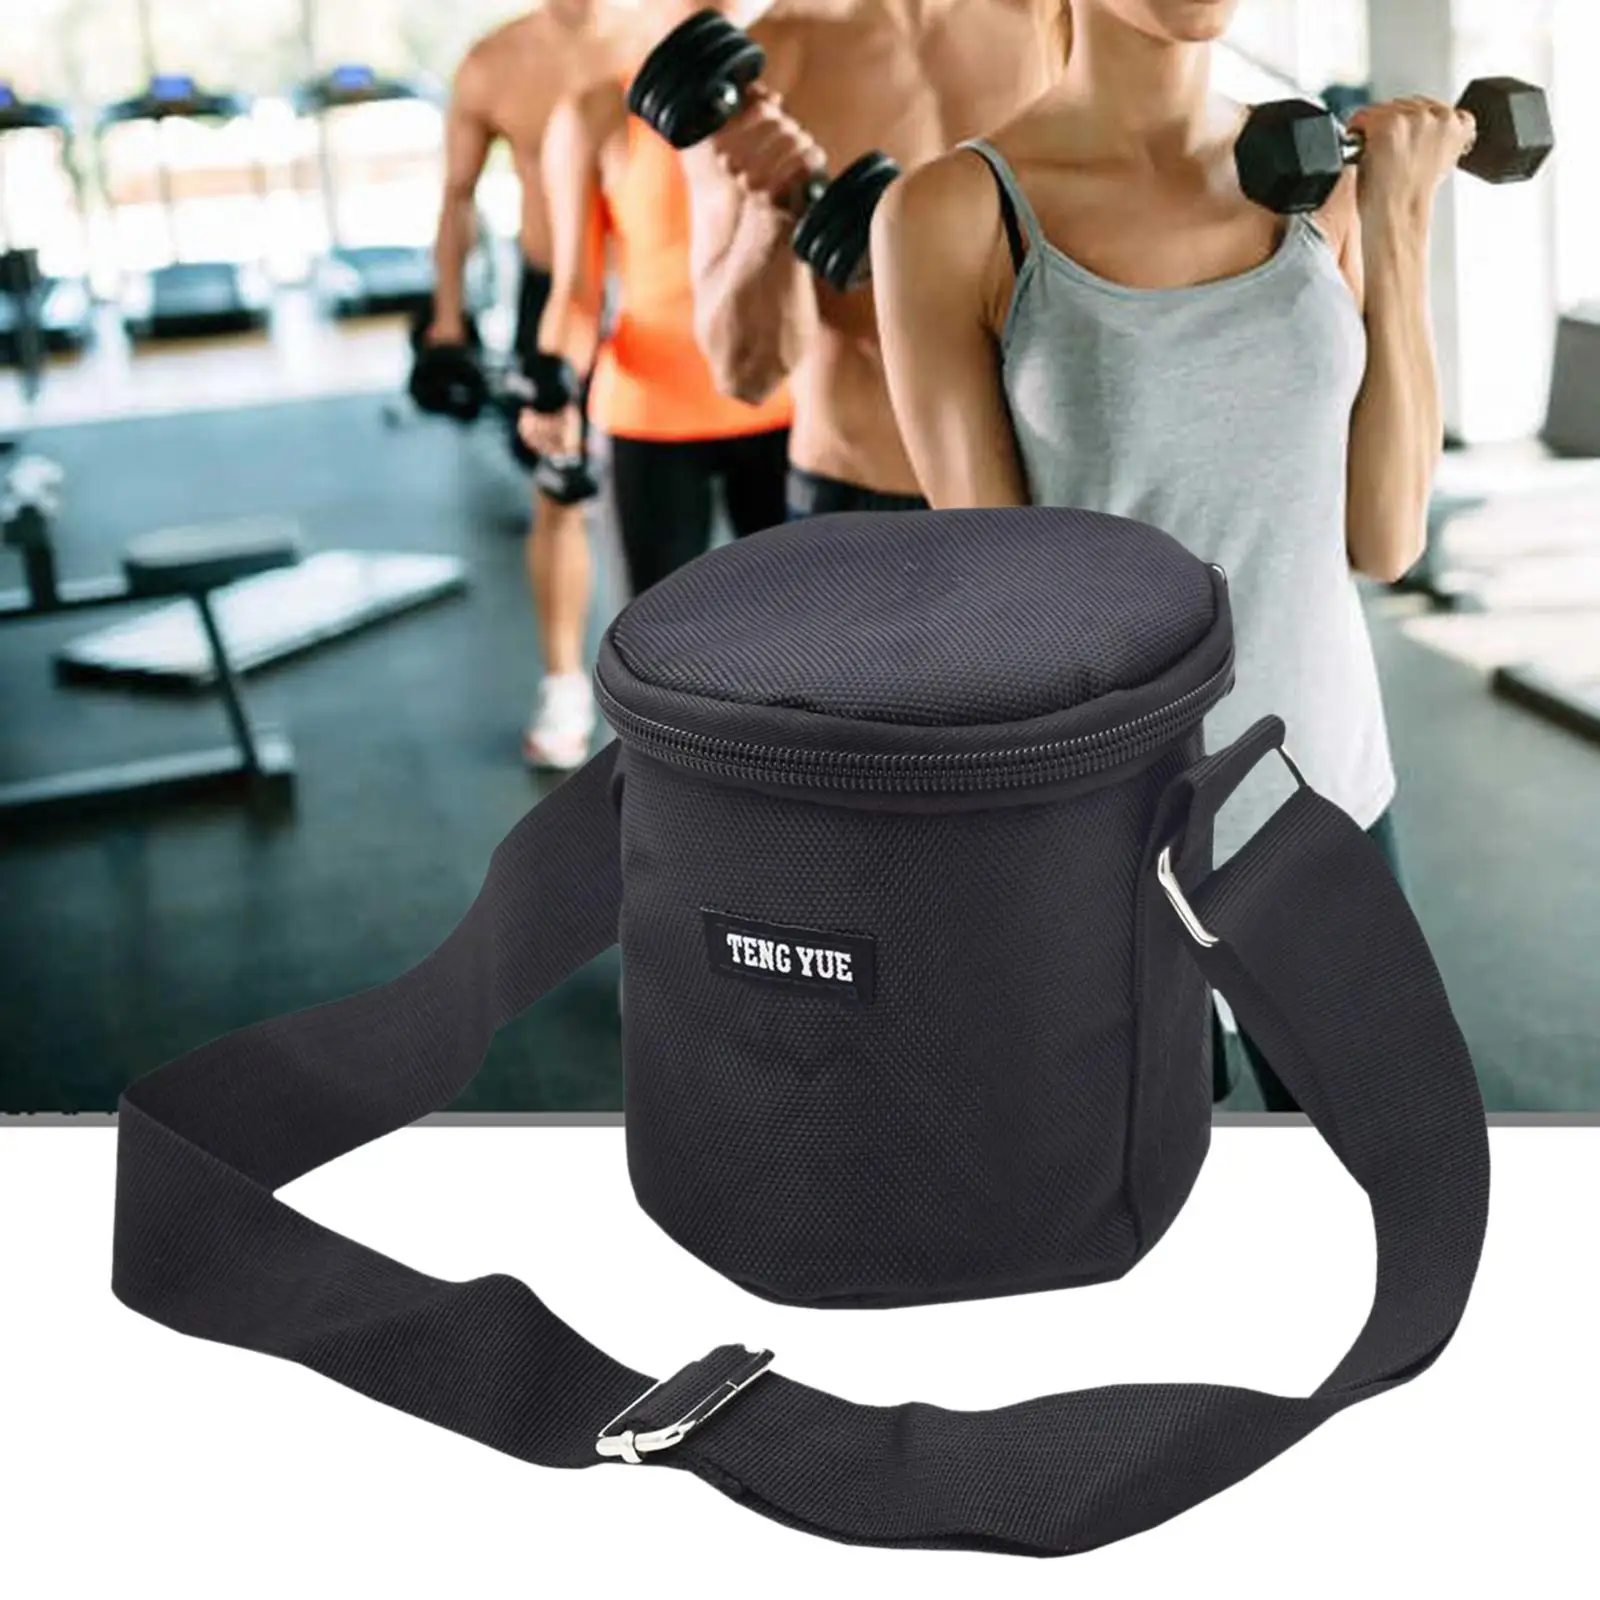 Oxford Fabric Dumbbell Plates Bag Adjustable Strap Portable Carrying Bag